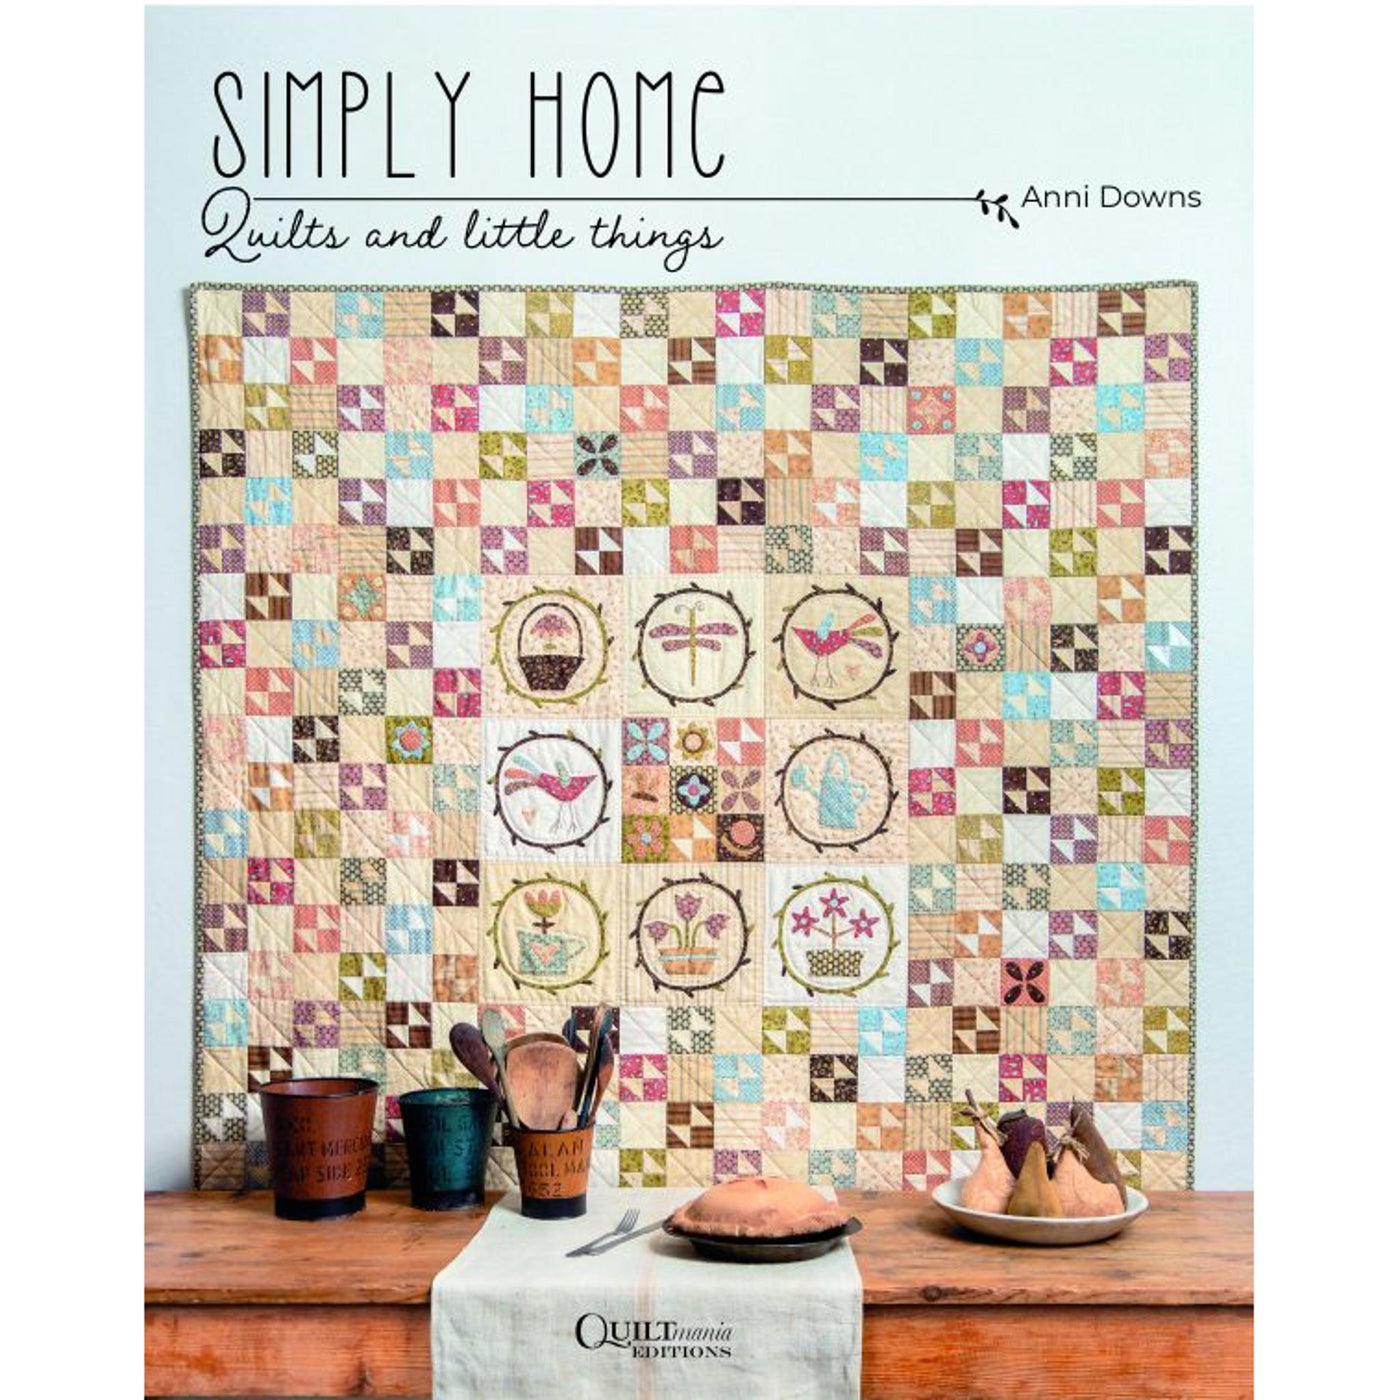 Simply Home, Quilts and little things - Anni Downs